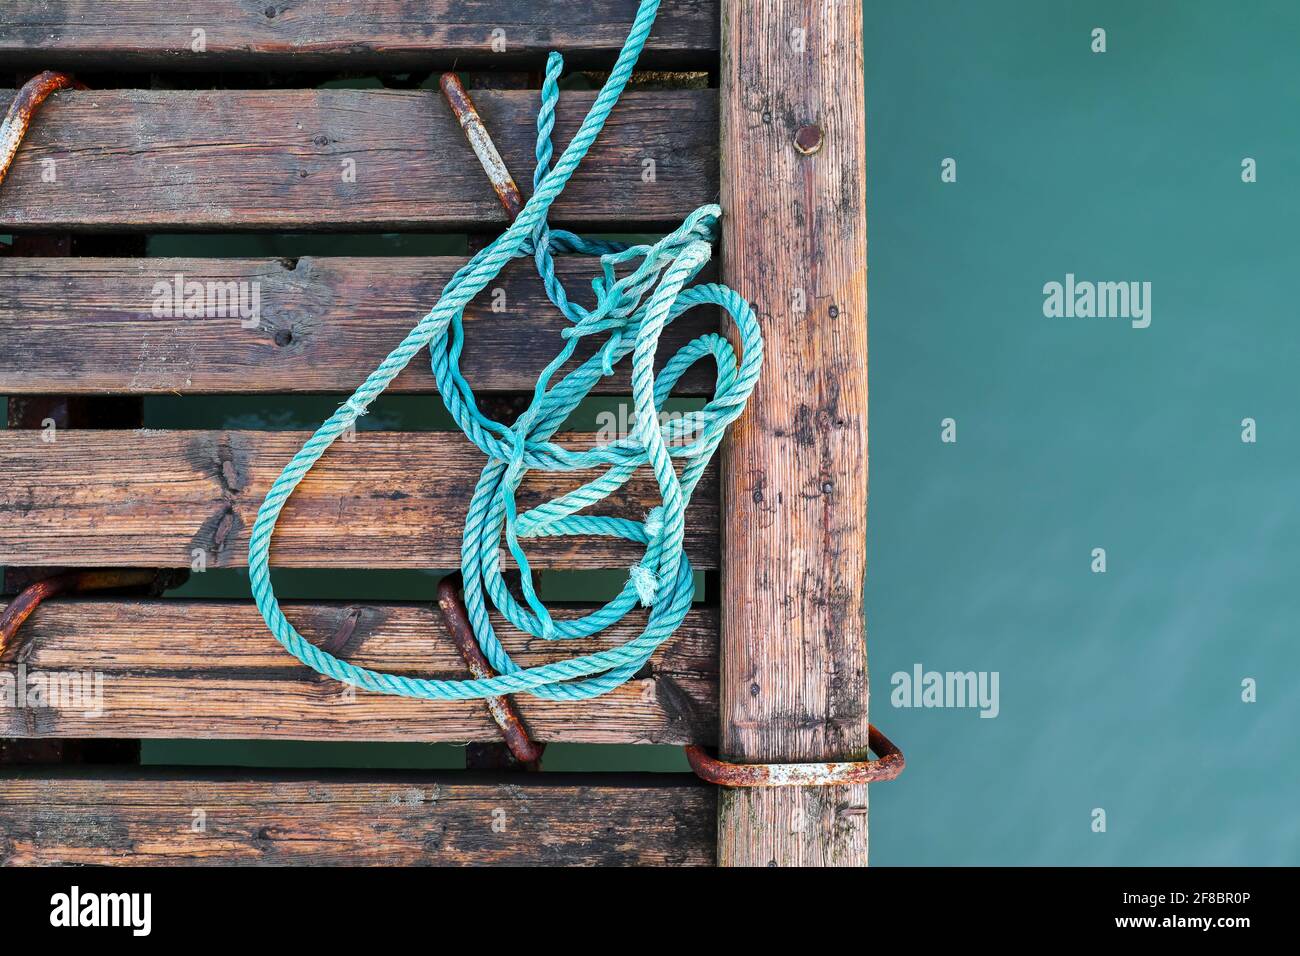 Wooden pier with blue sea. Wood floor or terrace beside the blue crystal clear water and a rope. Stock Photo